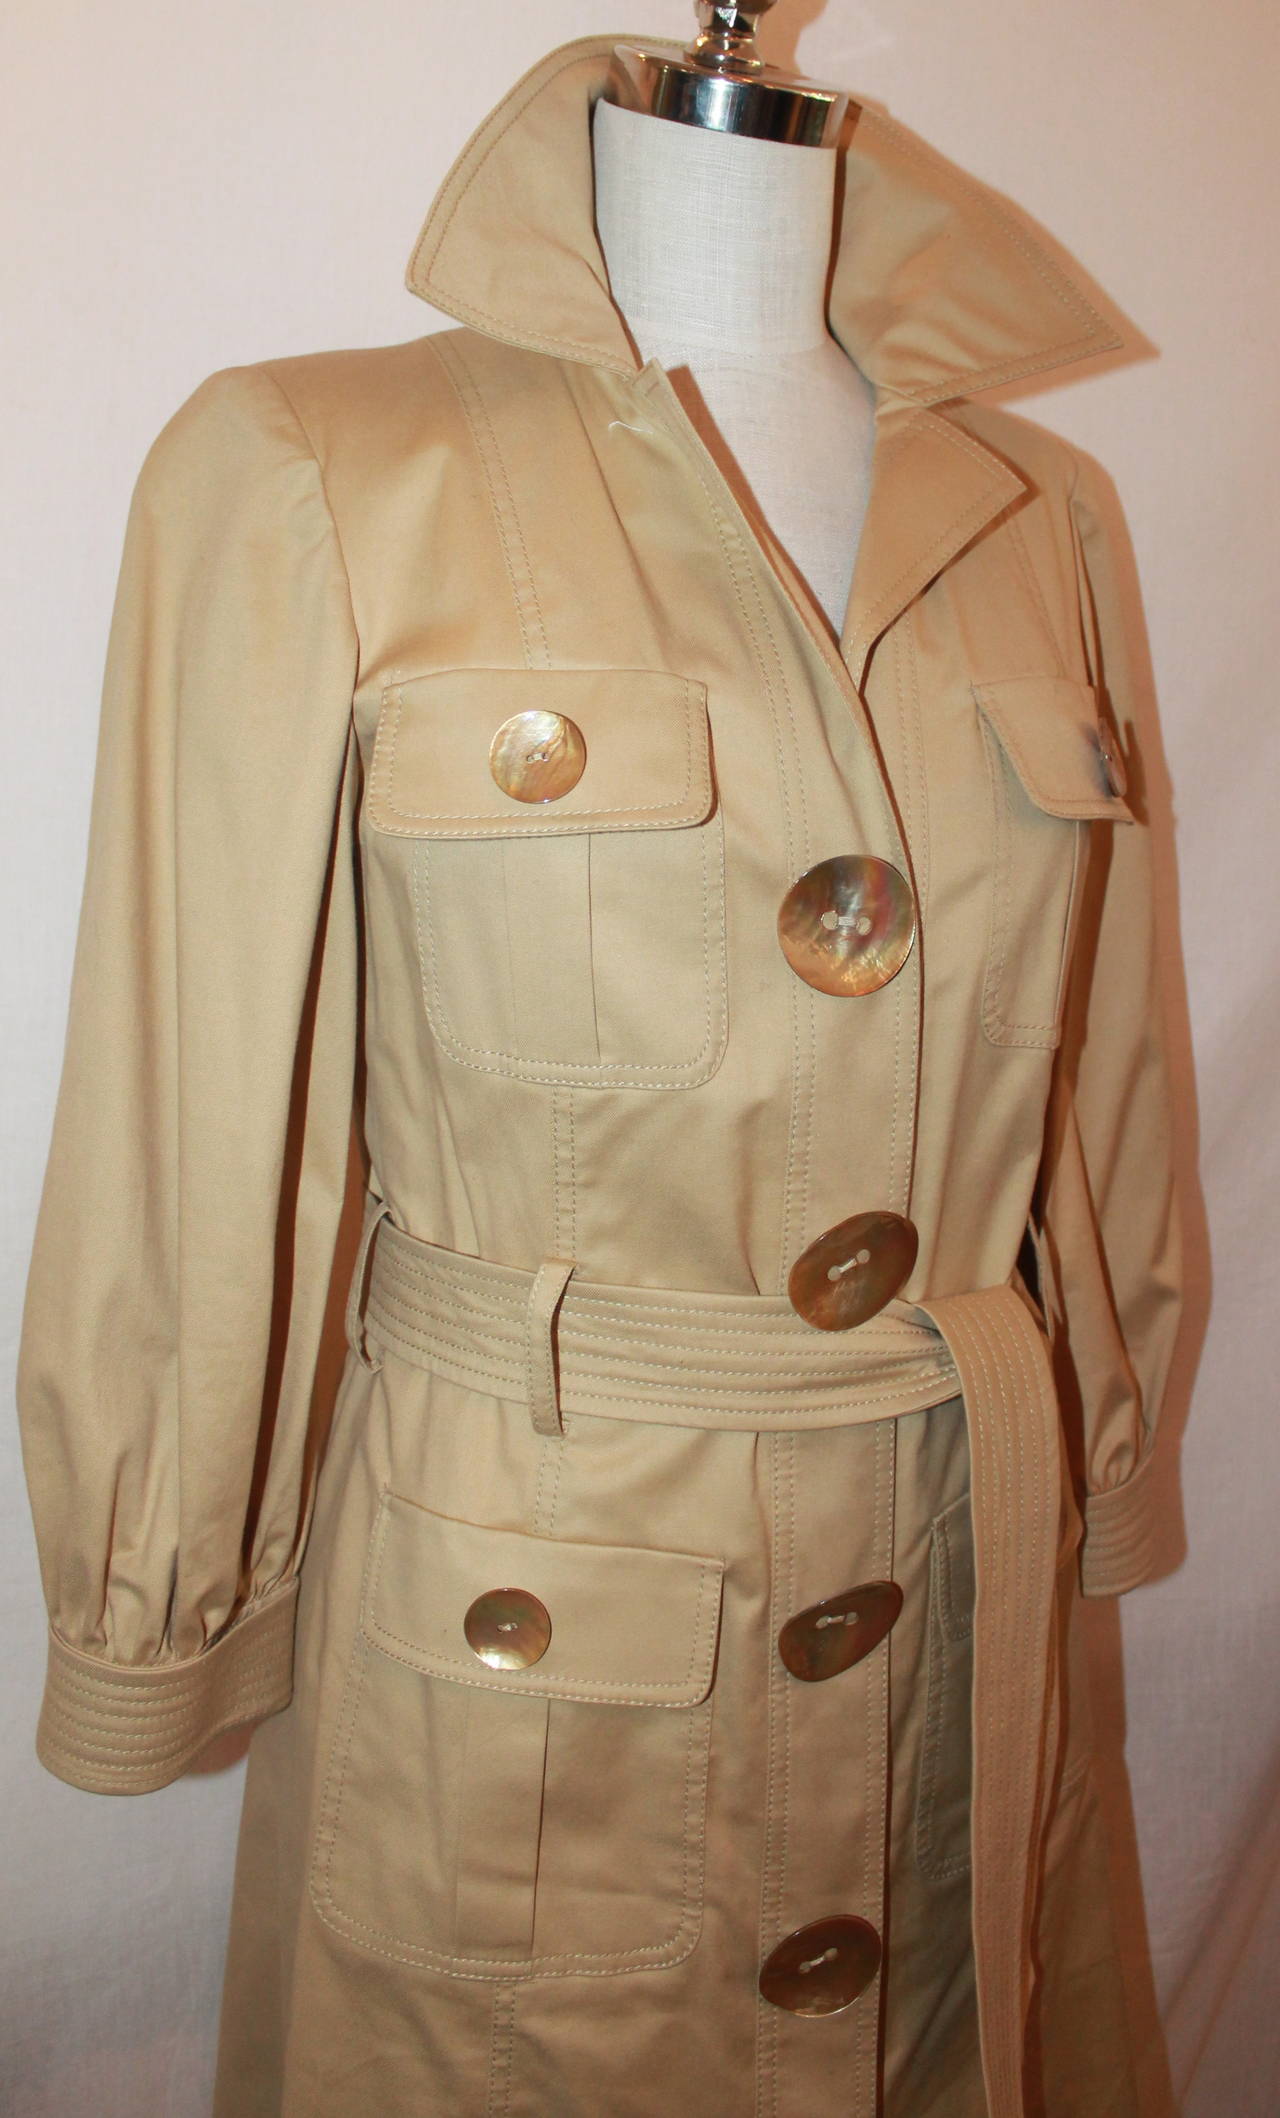 Oscar De La Renta Beige Cotton Trench Coat - 4. This coat is in excellent condition and has mother of pearl buttons. 

Measurements:
Bust- 36